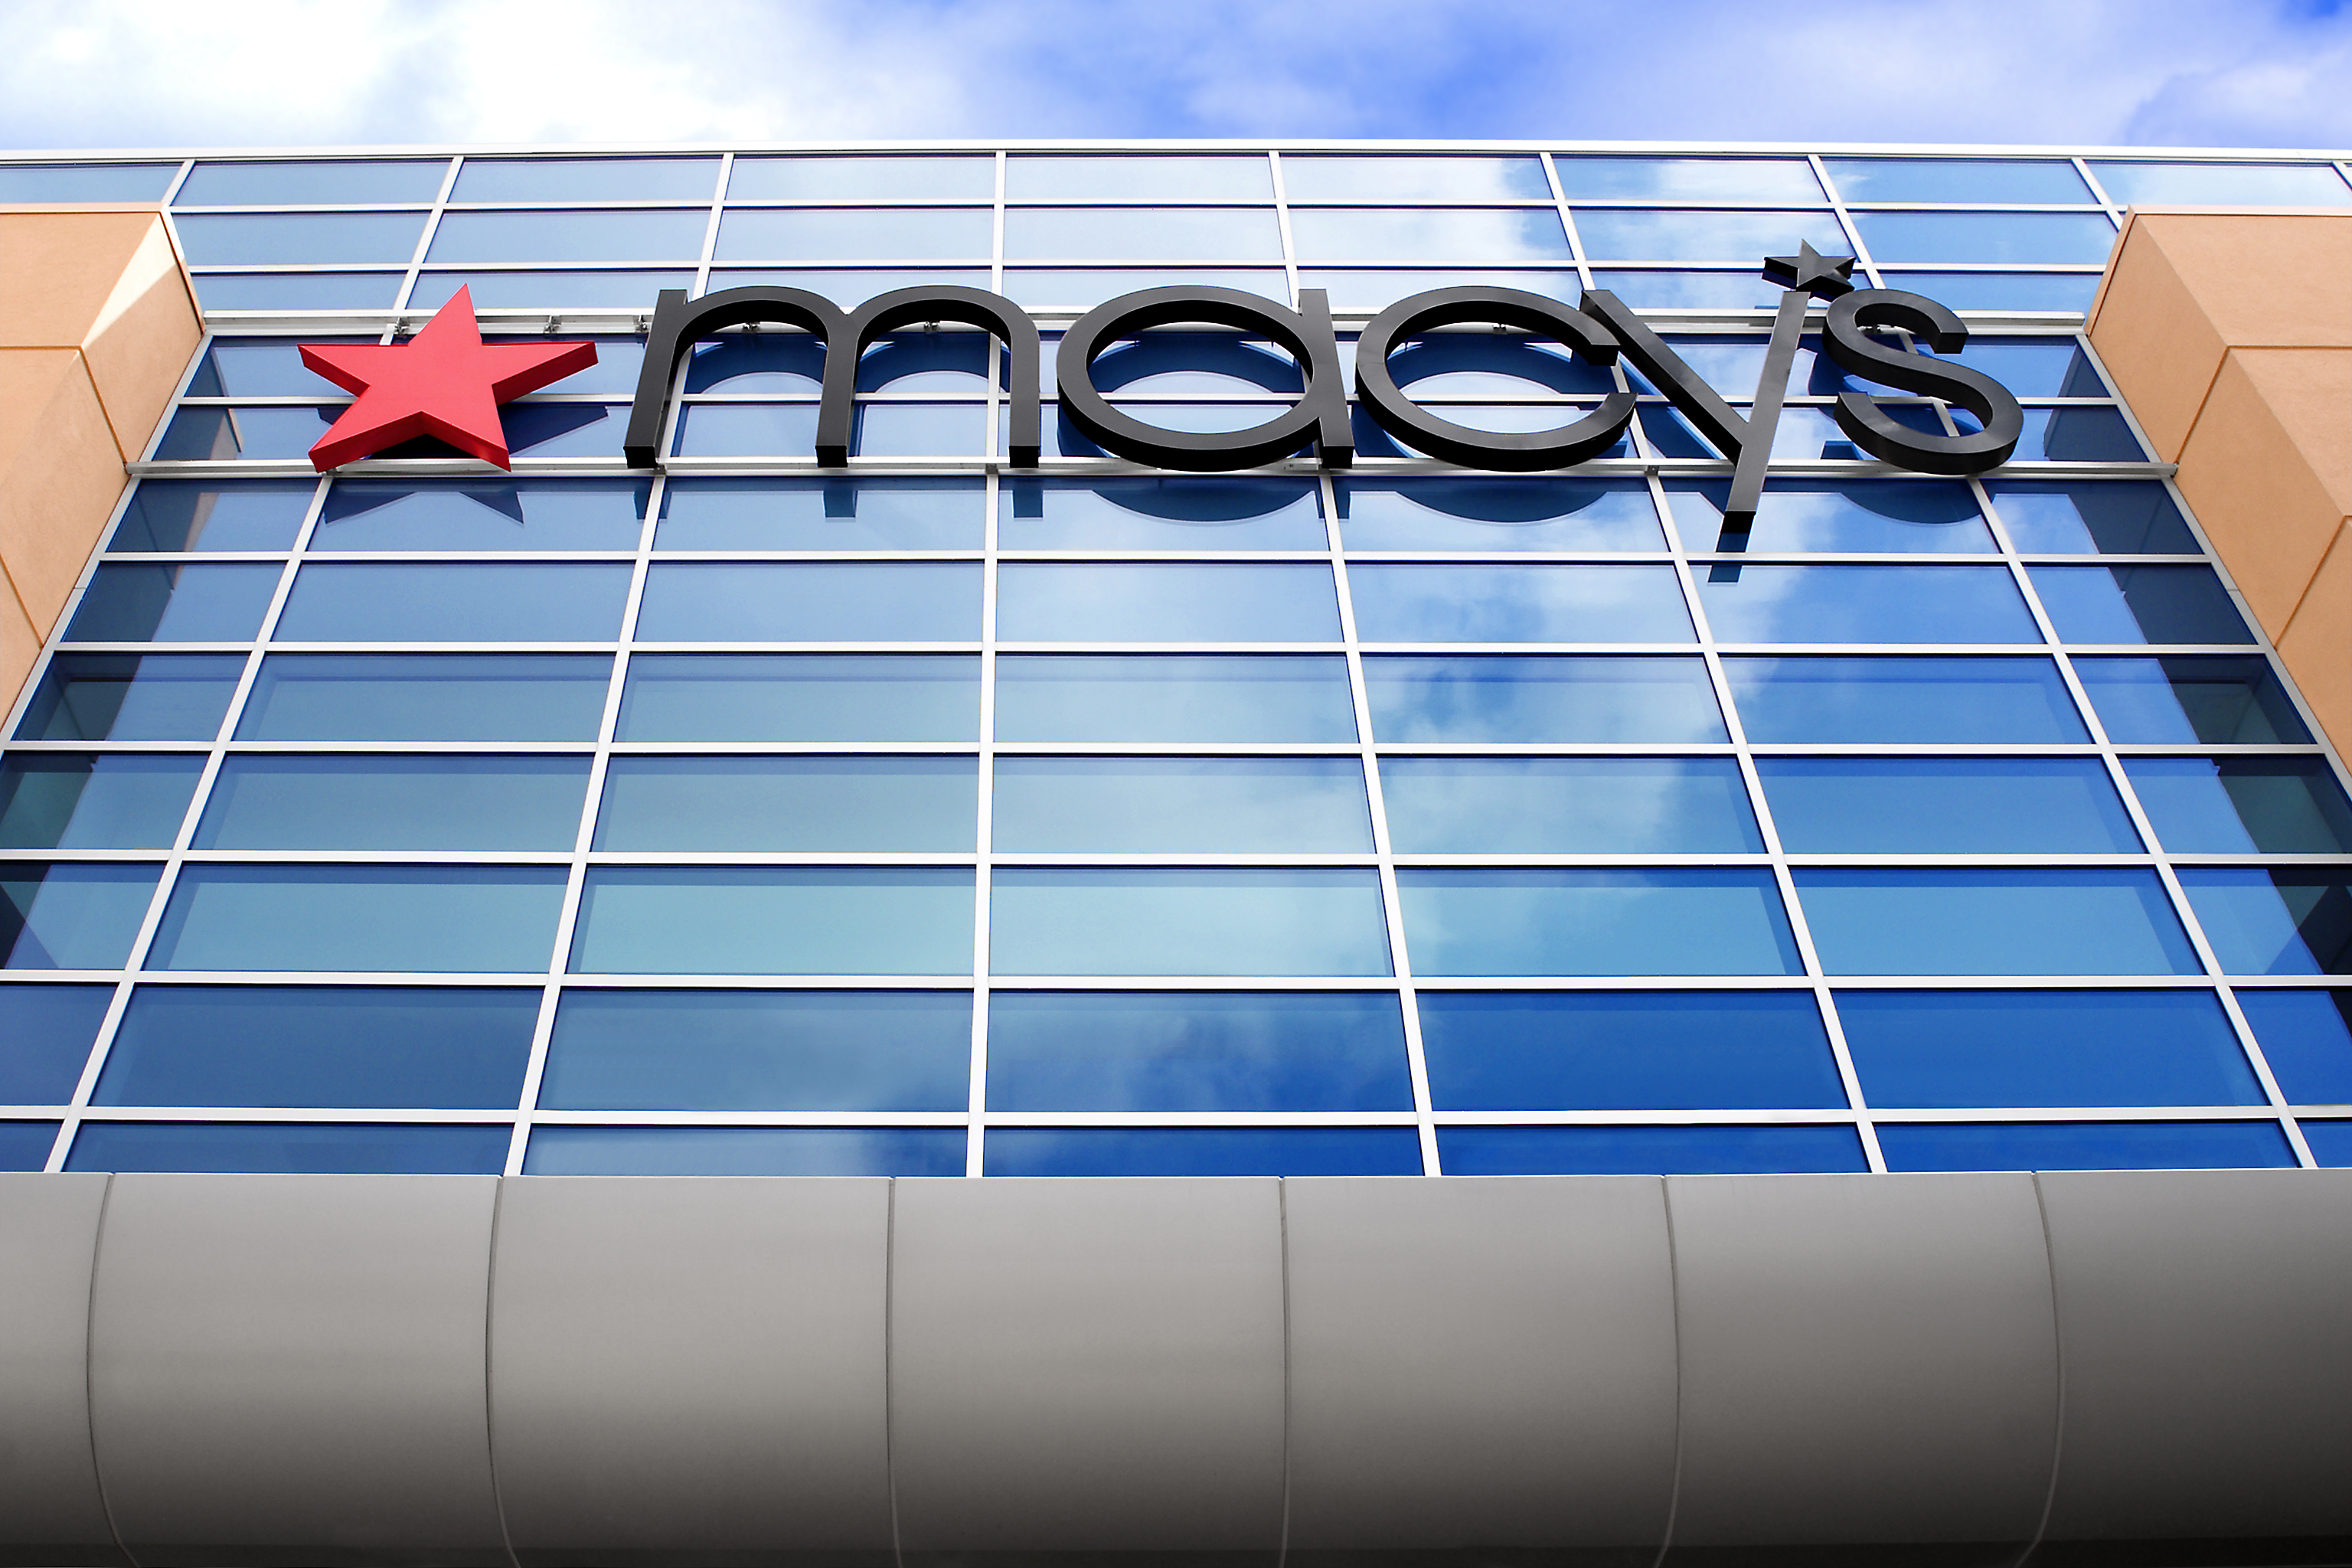 Store closings by Macys and other chains have grabbed headlines, but losing an anchor can be a long-term gain for a center.